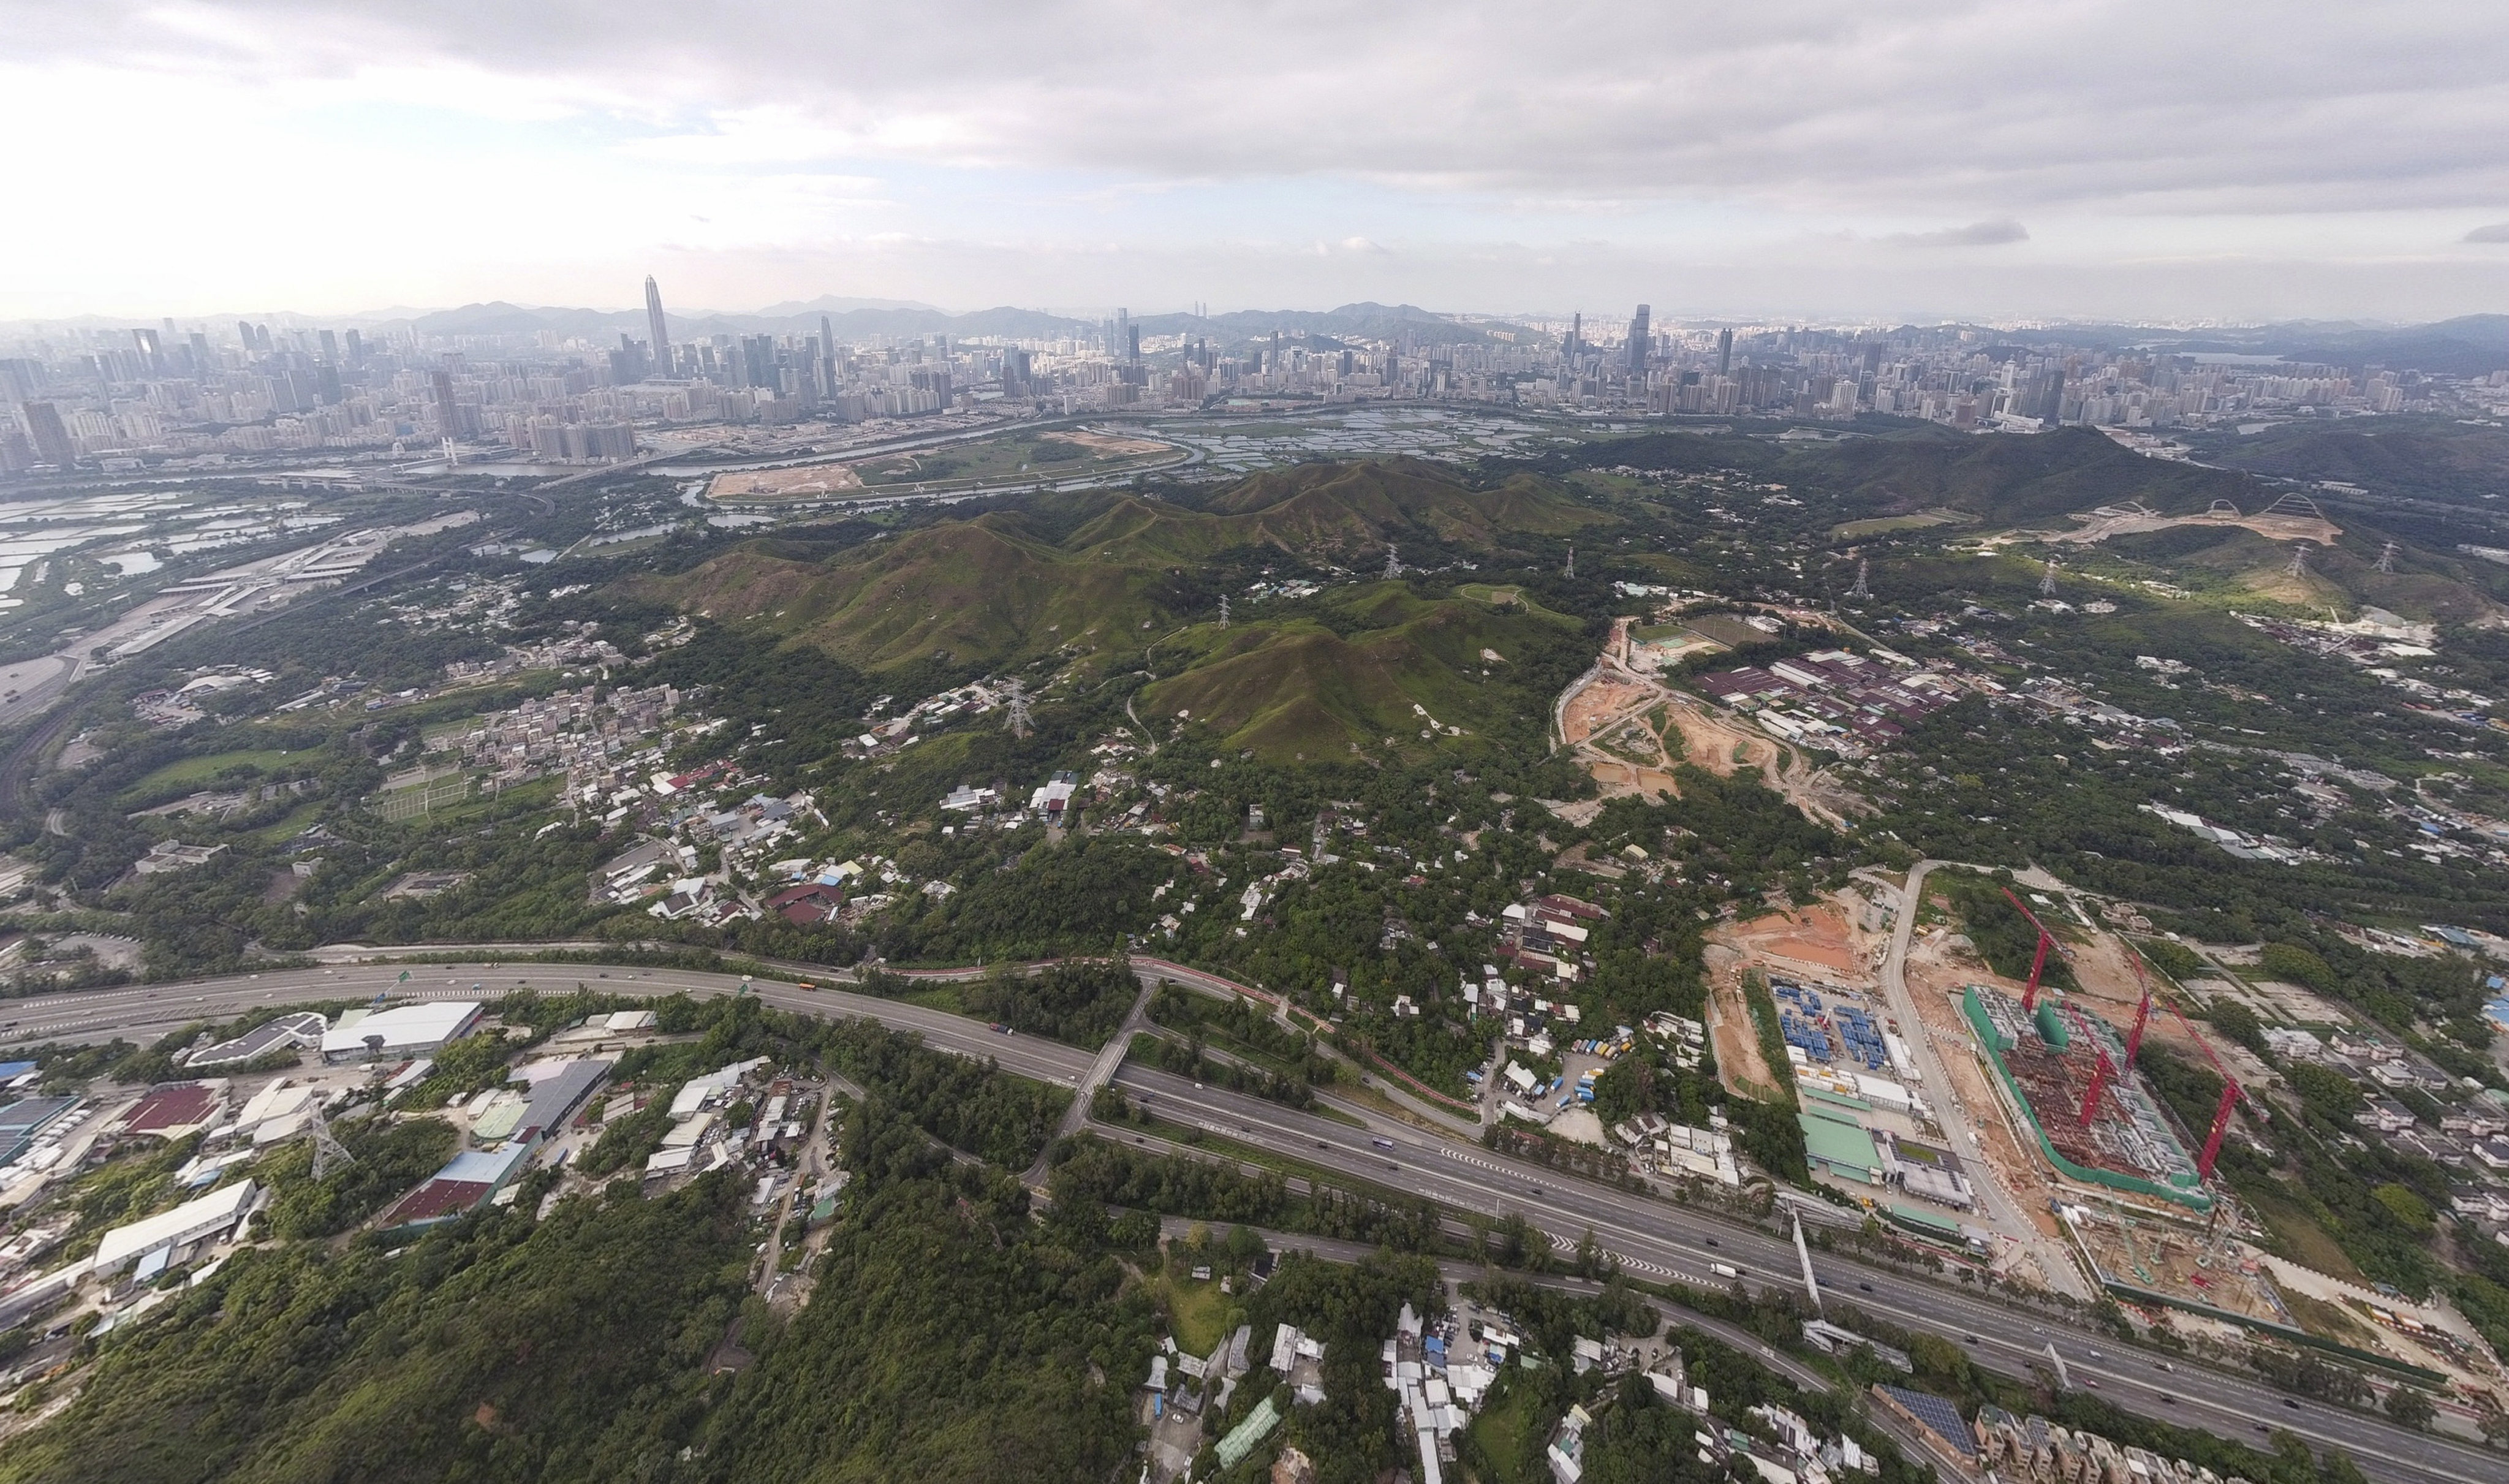 The northern New Territories in Hong Kong comprises swathes of undeveloped land. Photo: Martin Chan